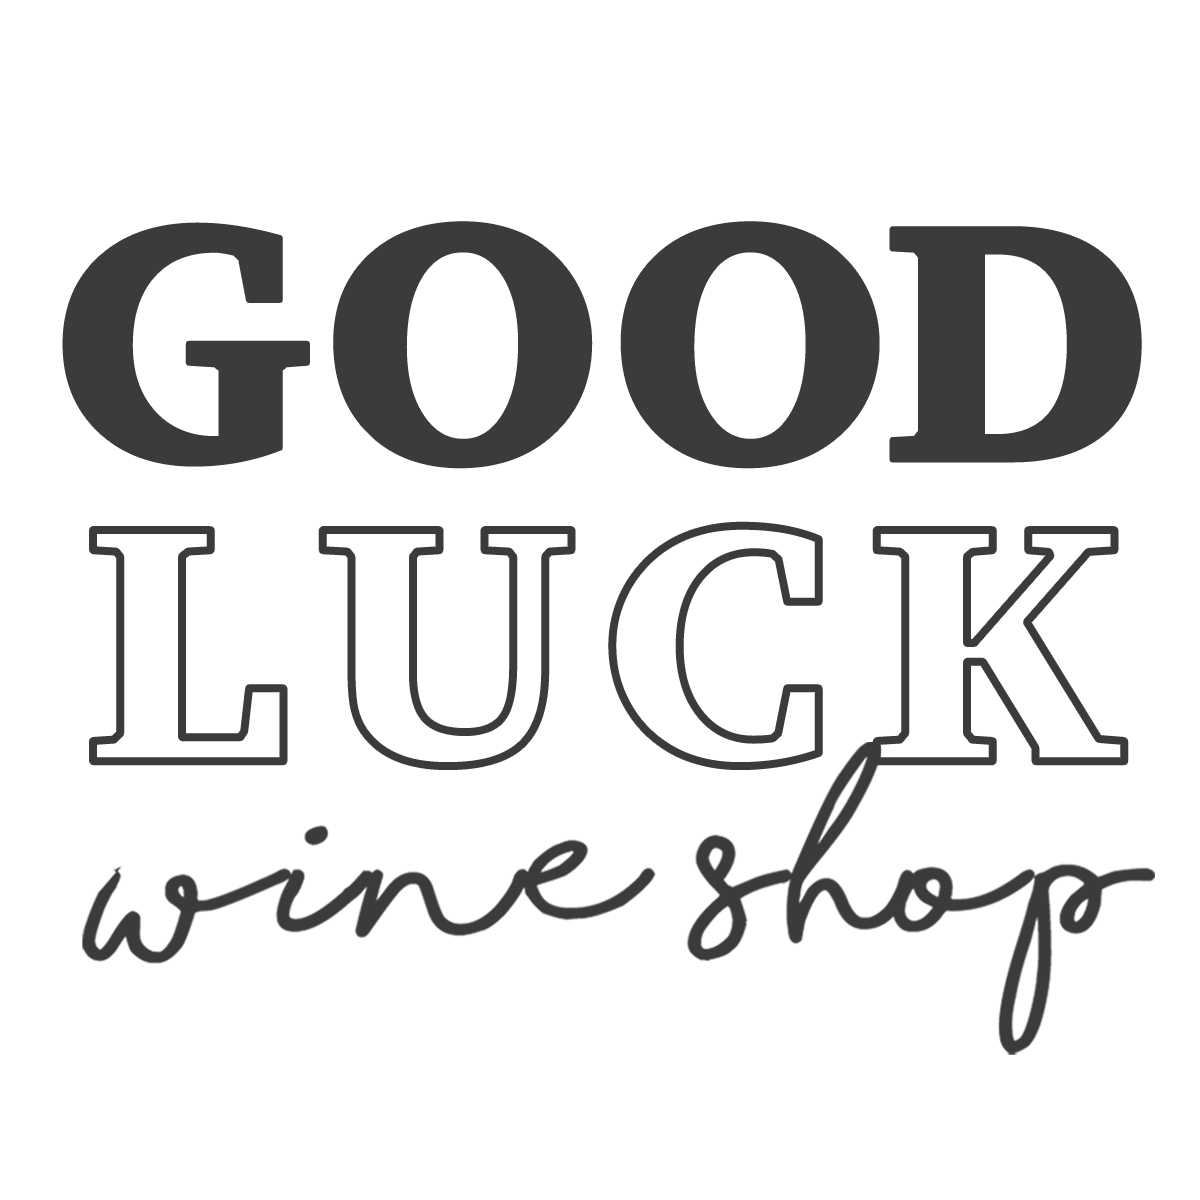 Good Luck Fortune, Image & Photo (Free Trial) | Bigstock